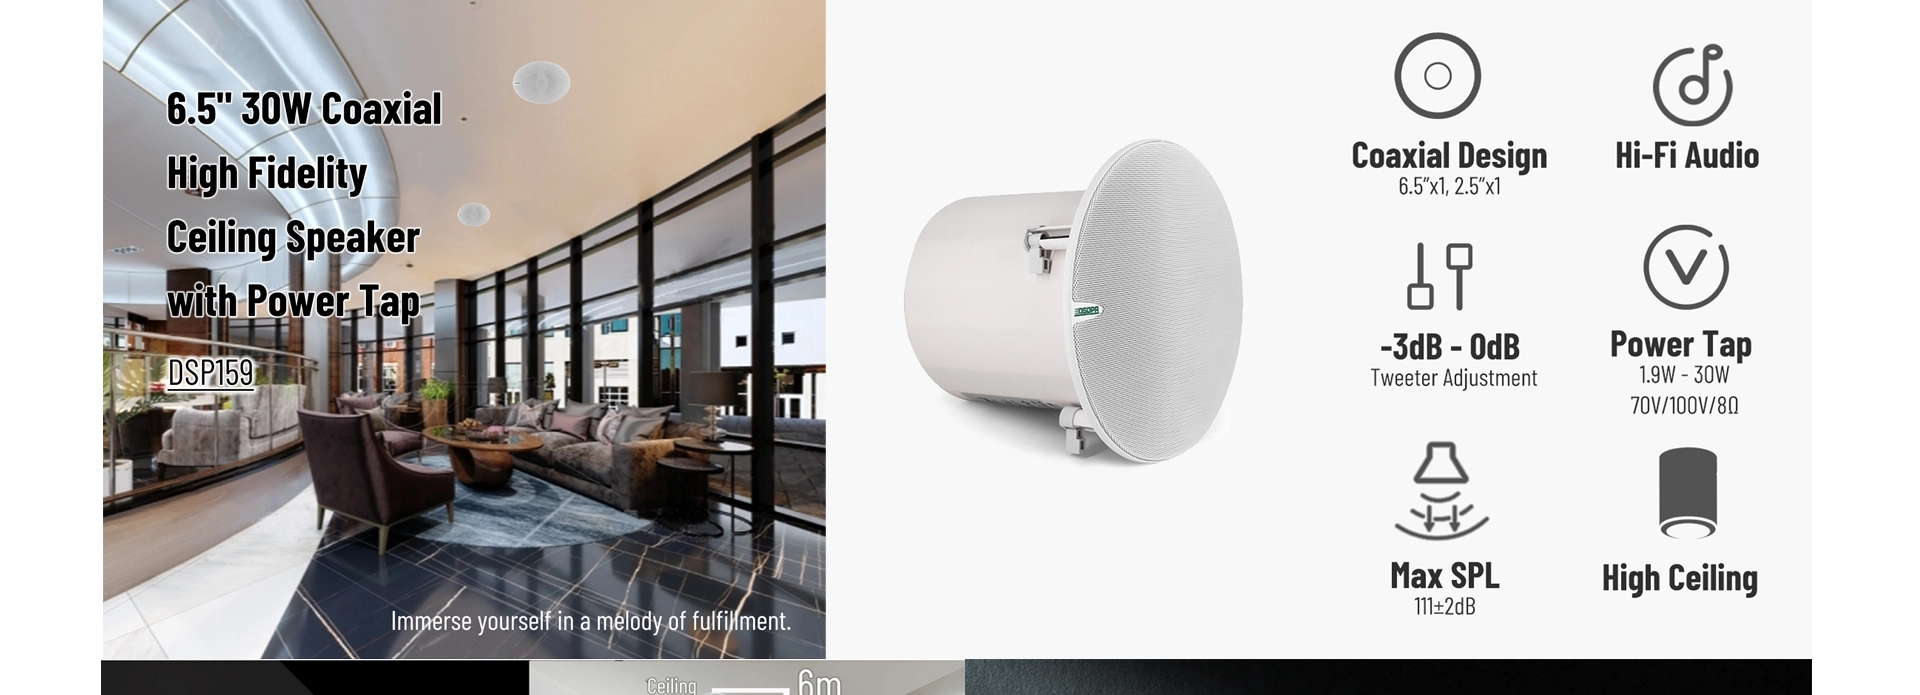 HiFi Coaxial Ceiling Speaker with Power Tap